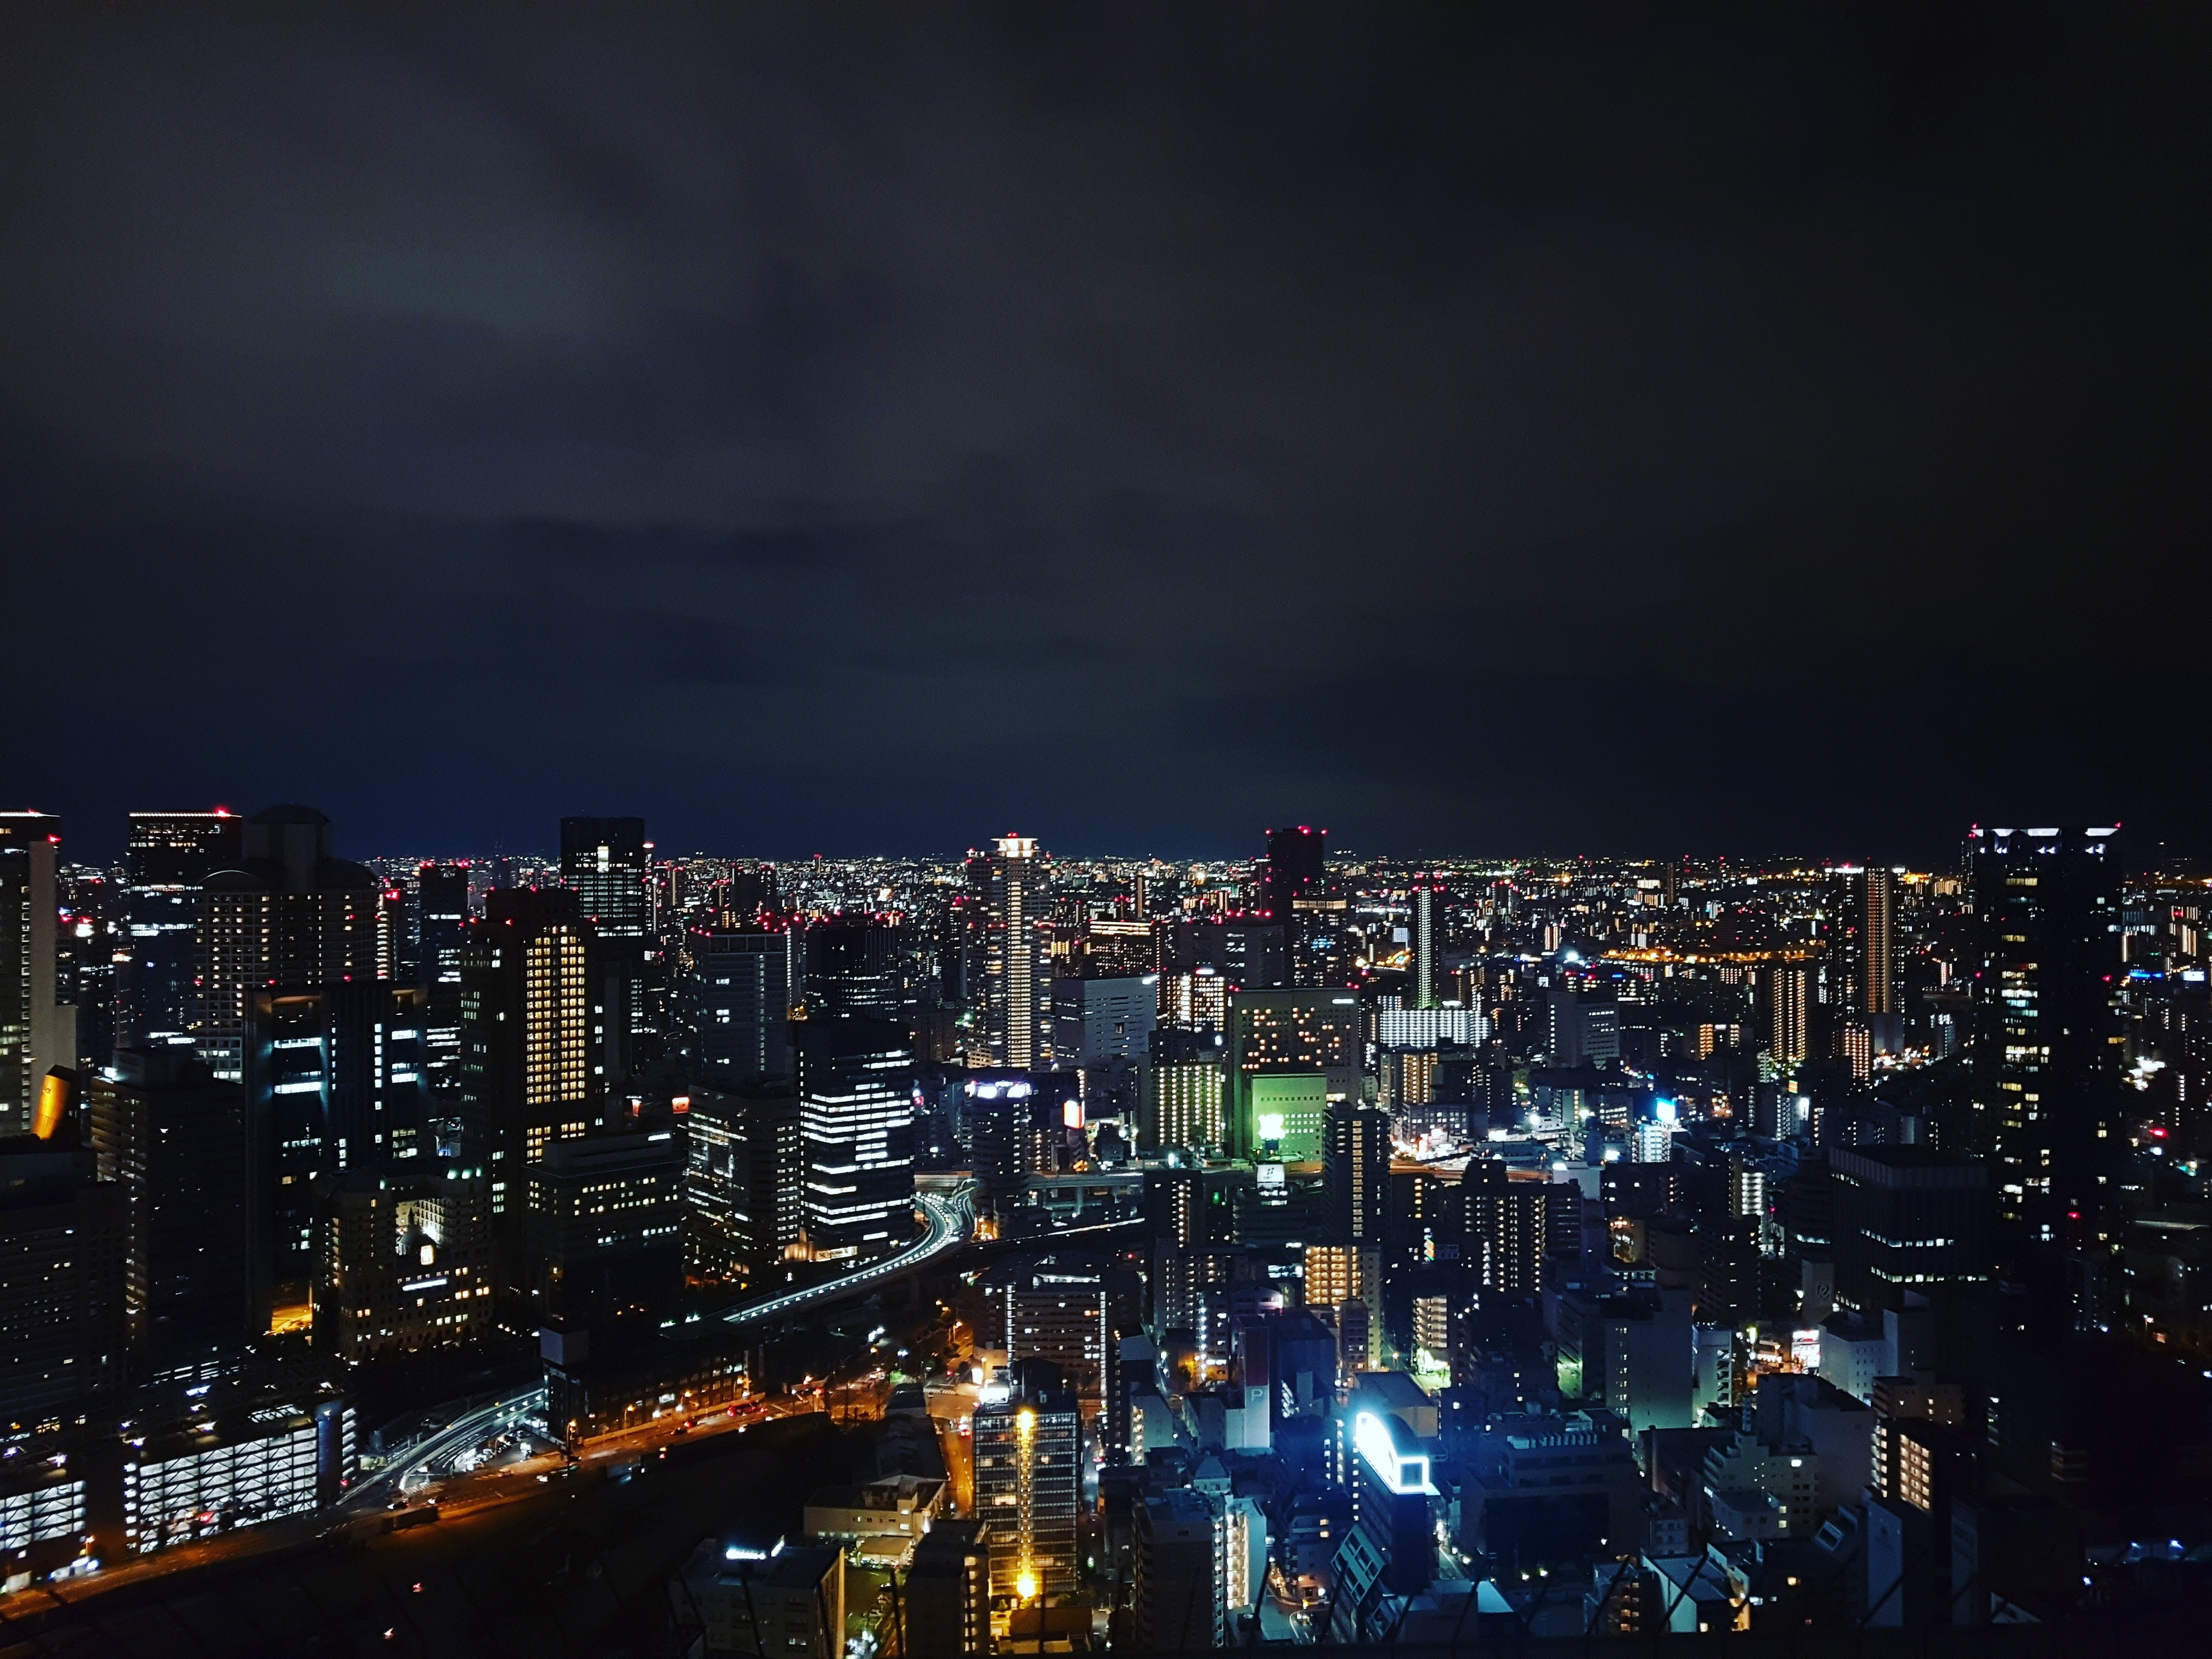 high-rise building, Night city, Buildings, City lights